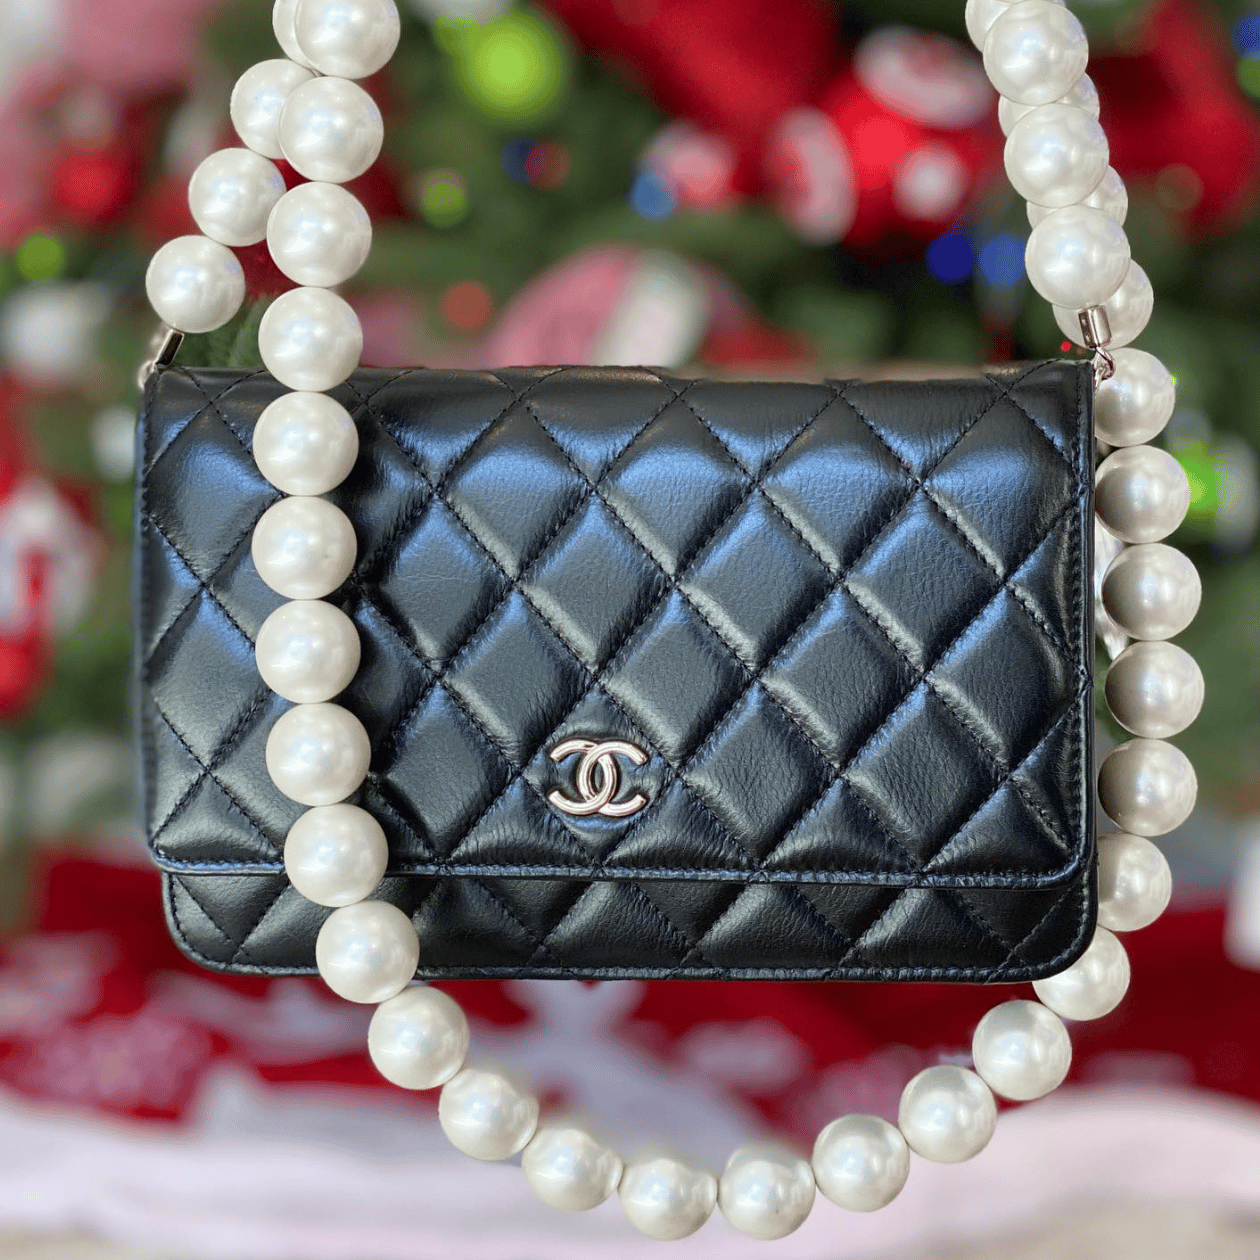 Chanel Black Maxi Pearls Wallet on Chain 2